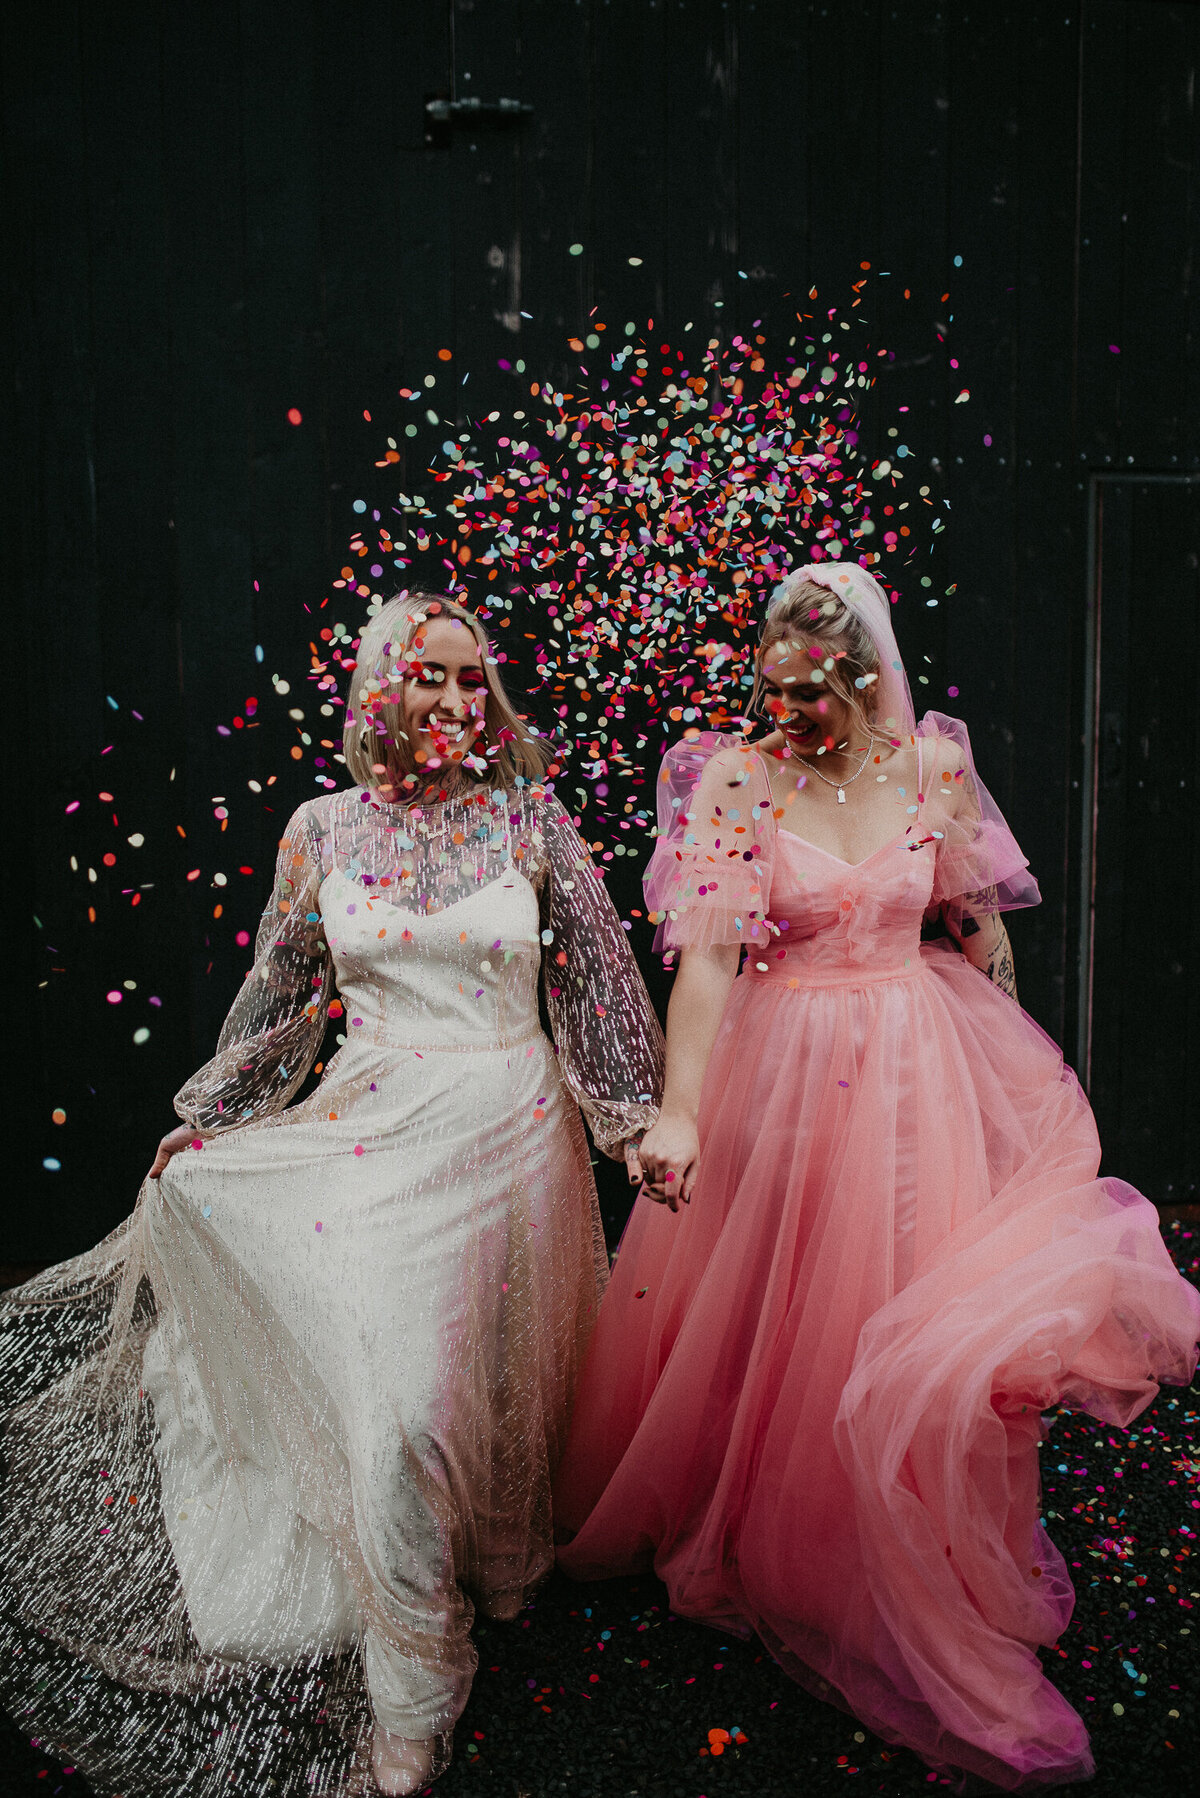 Our same sex couple throw colourful confetti outside the giraffe shed. the confetti and the girls pinks and white dresses contrast against the industrial black barn of the wedding venue.